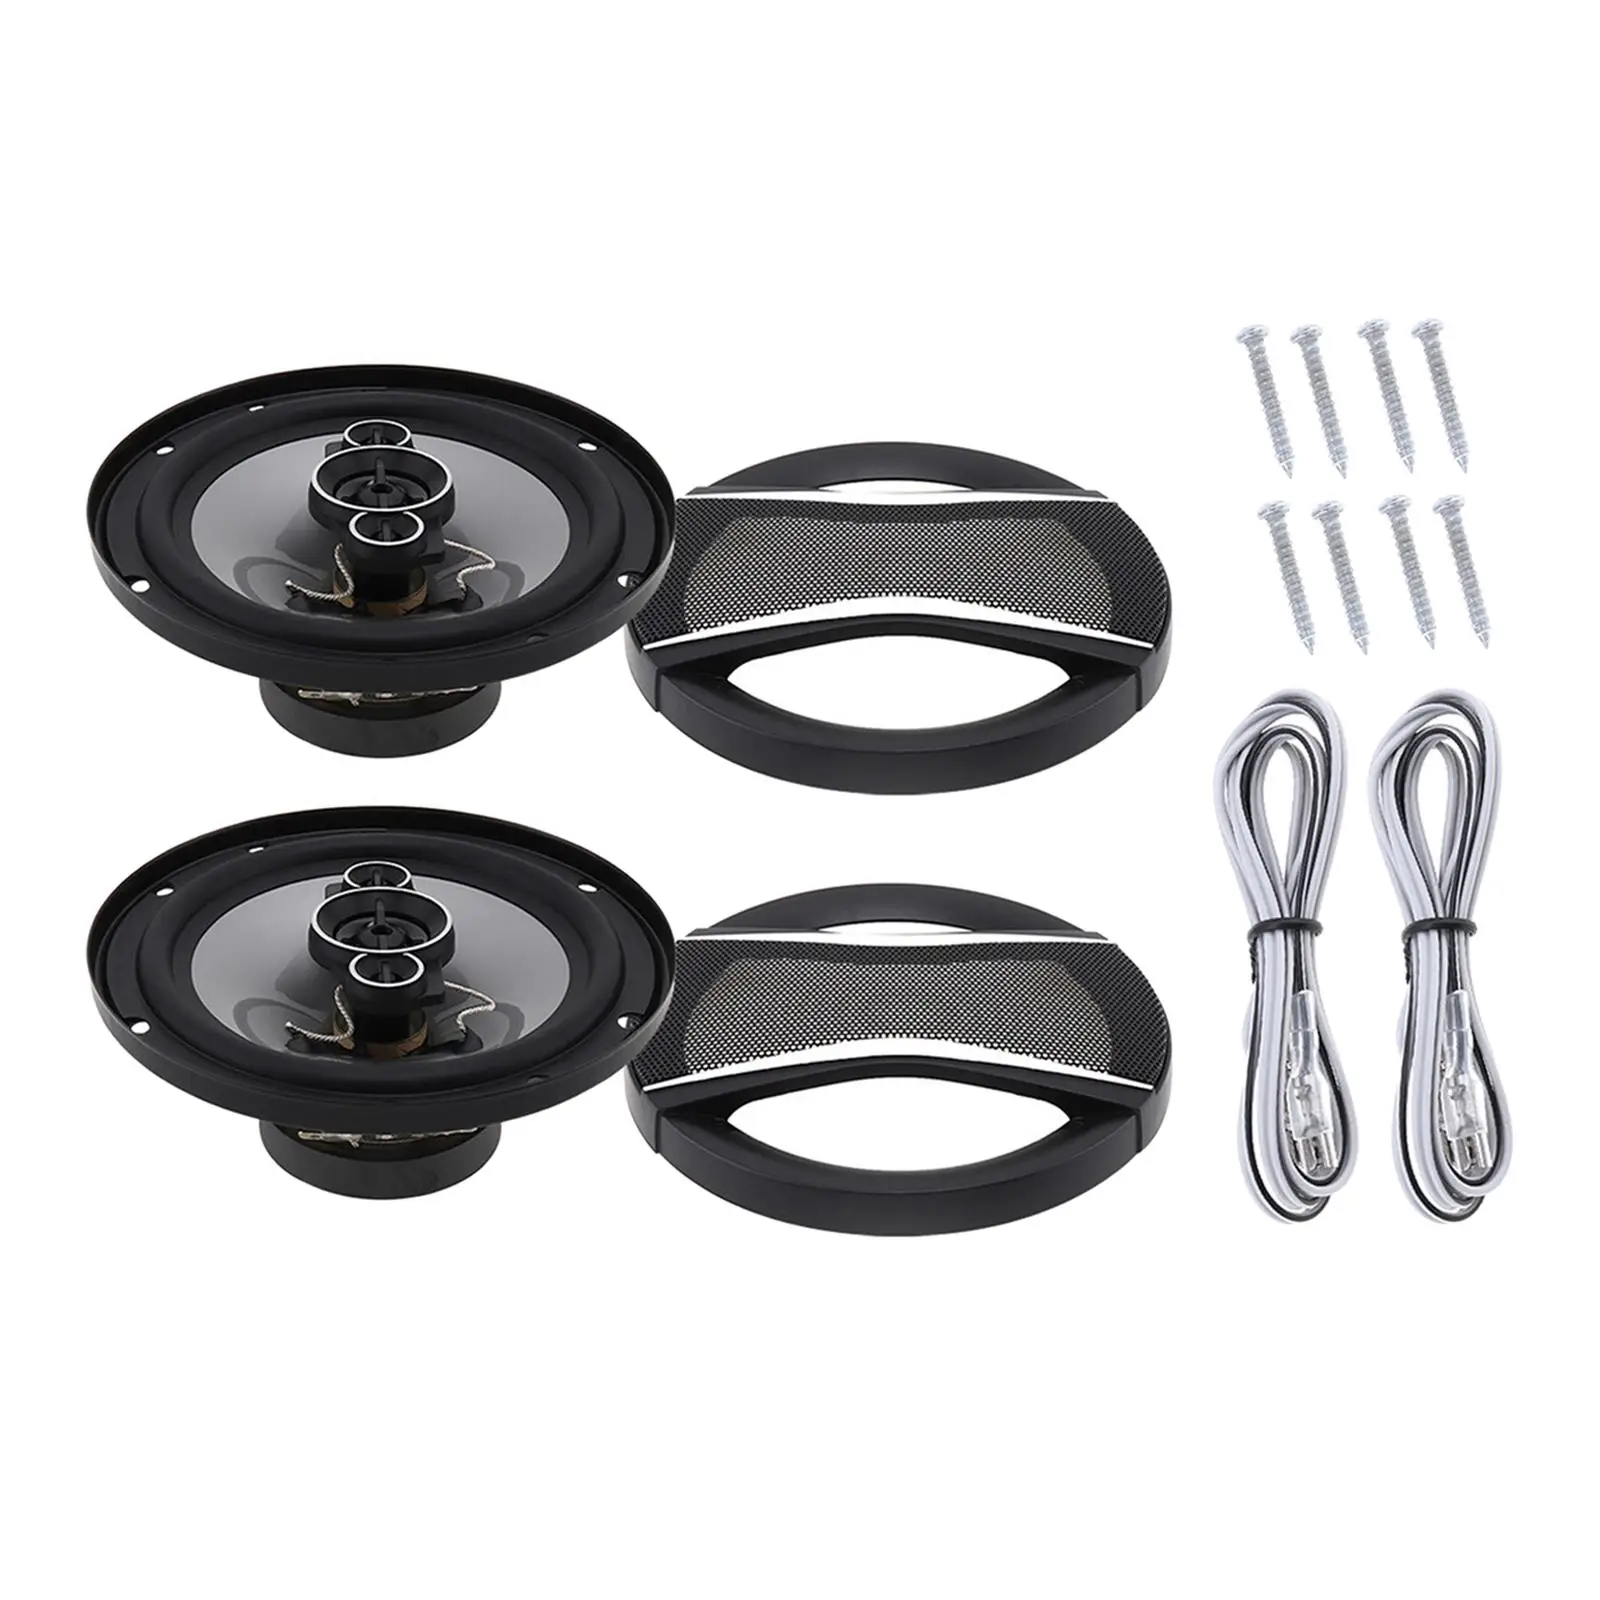 2x 6.5 inch 12V Coaxial Speakers Easy to Install Universal Car HiFi Vehicle